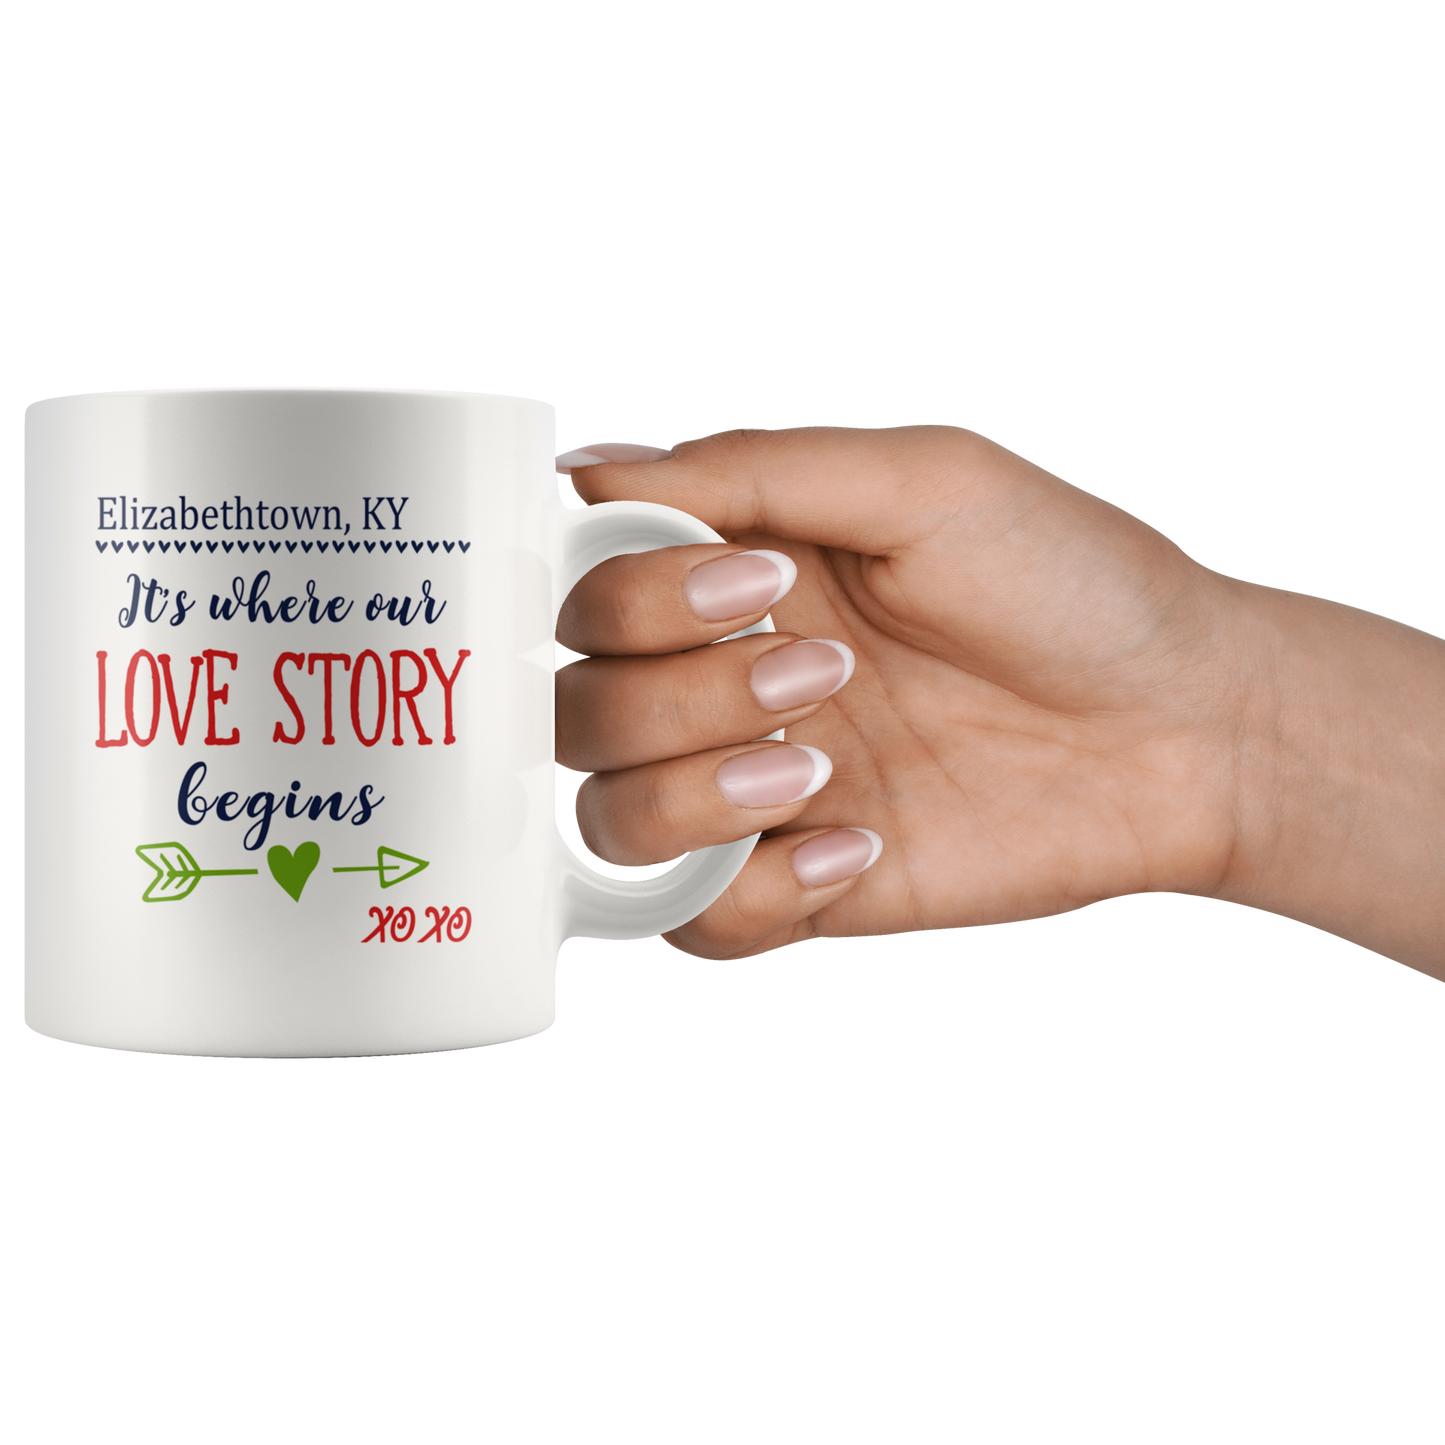 M-Our-20459663-sp-22827 - Mothers Day Gifts For Wife Mug - Elizabethtown Kentucky KY I